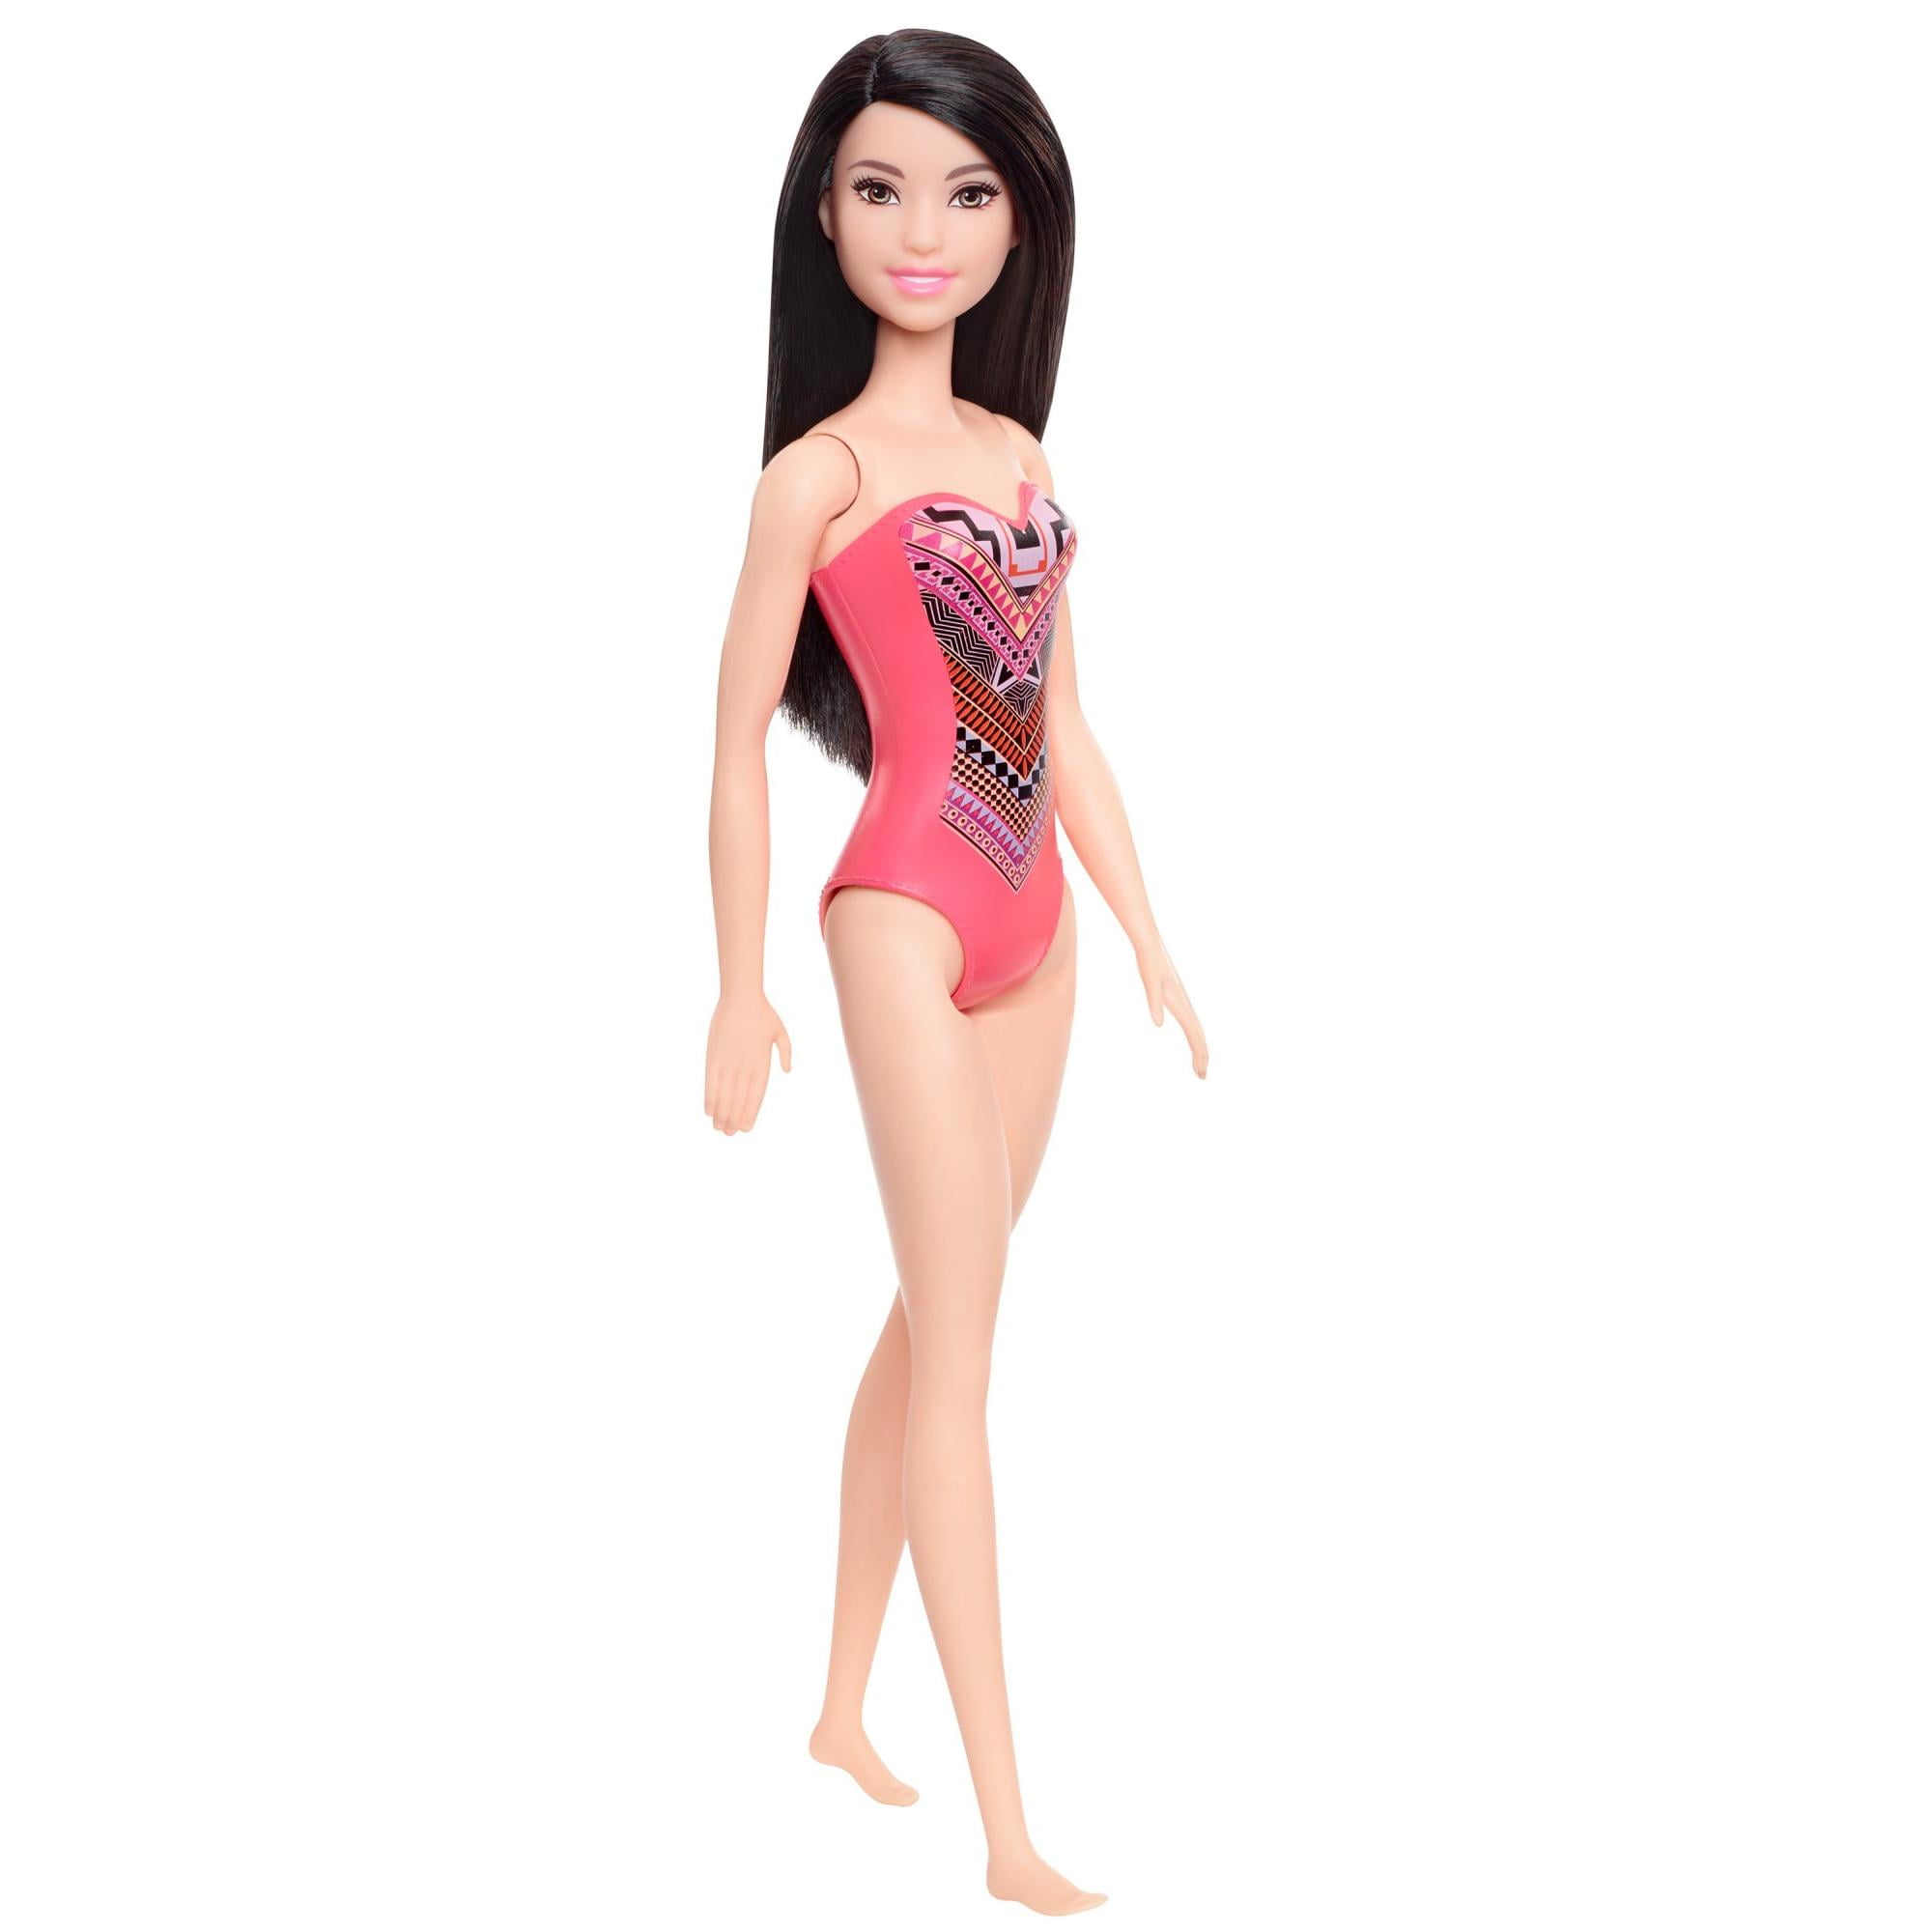 swimsuits for barbie dolls